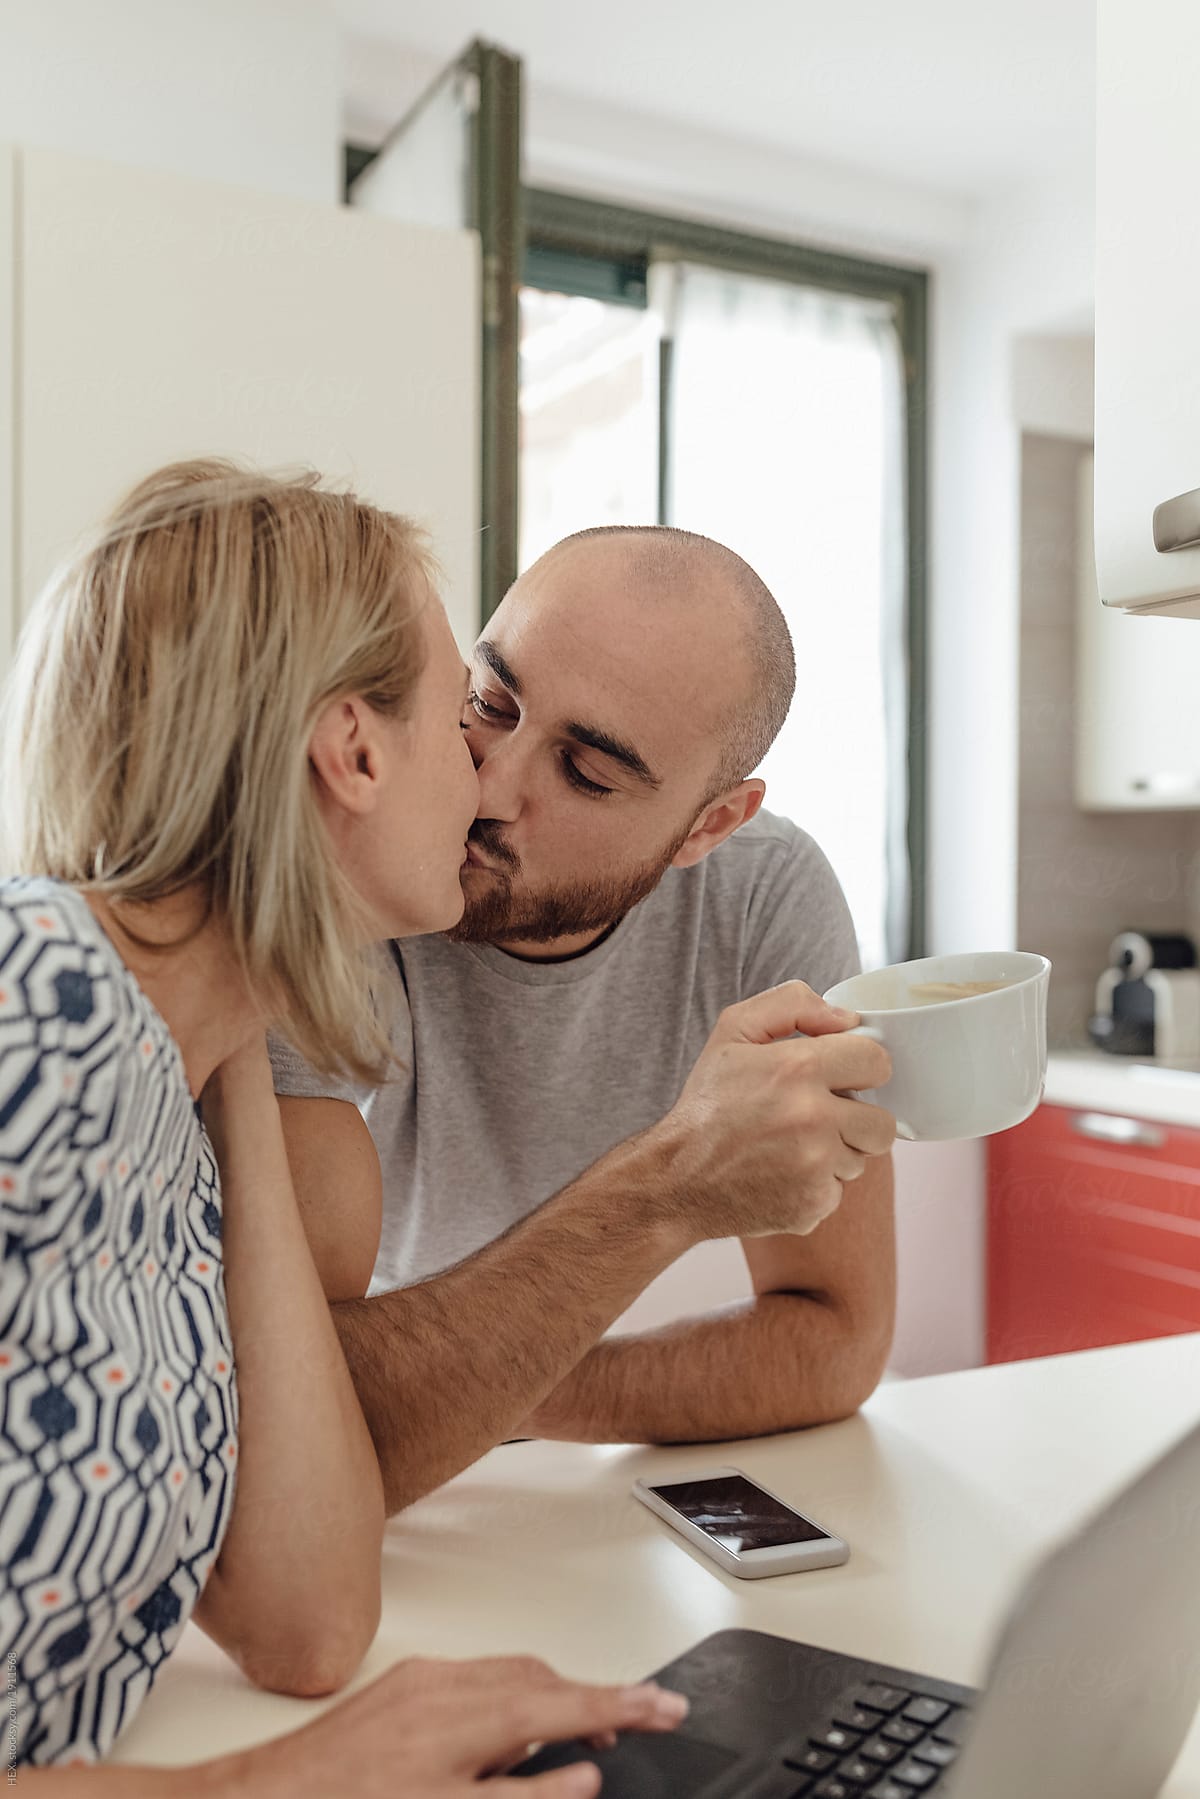 Adult Couple Using a Laptop From a Kitchen during the Morning Breakfast